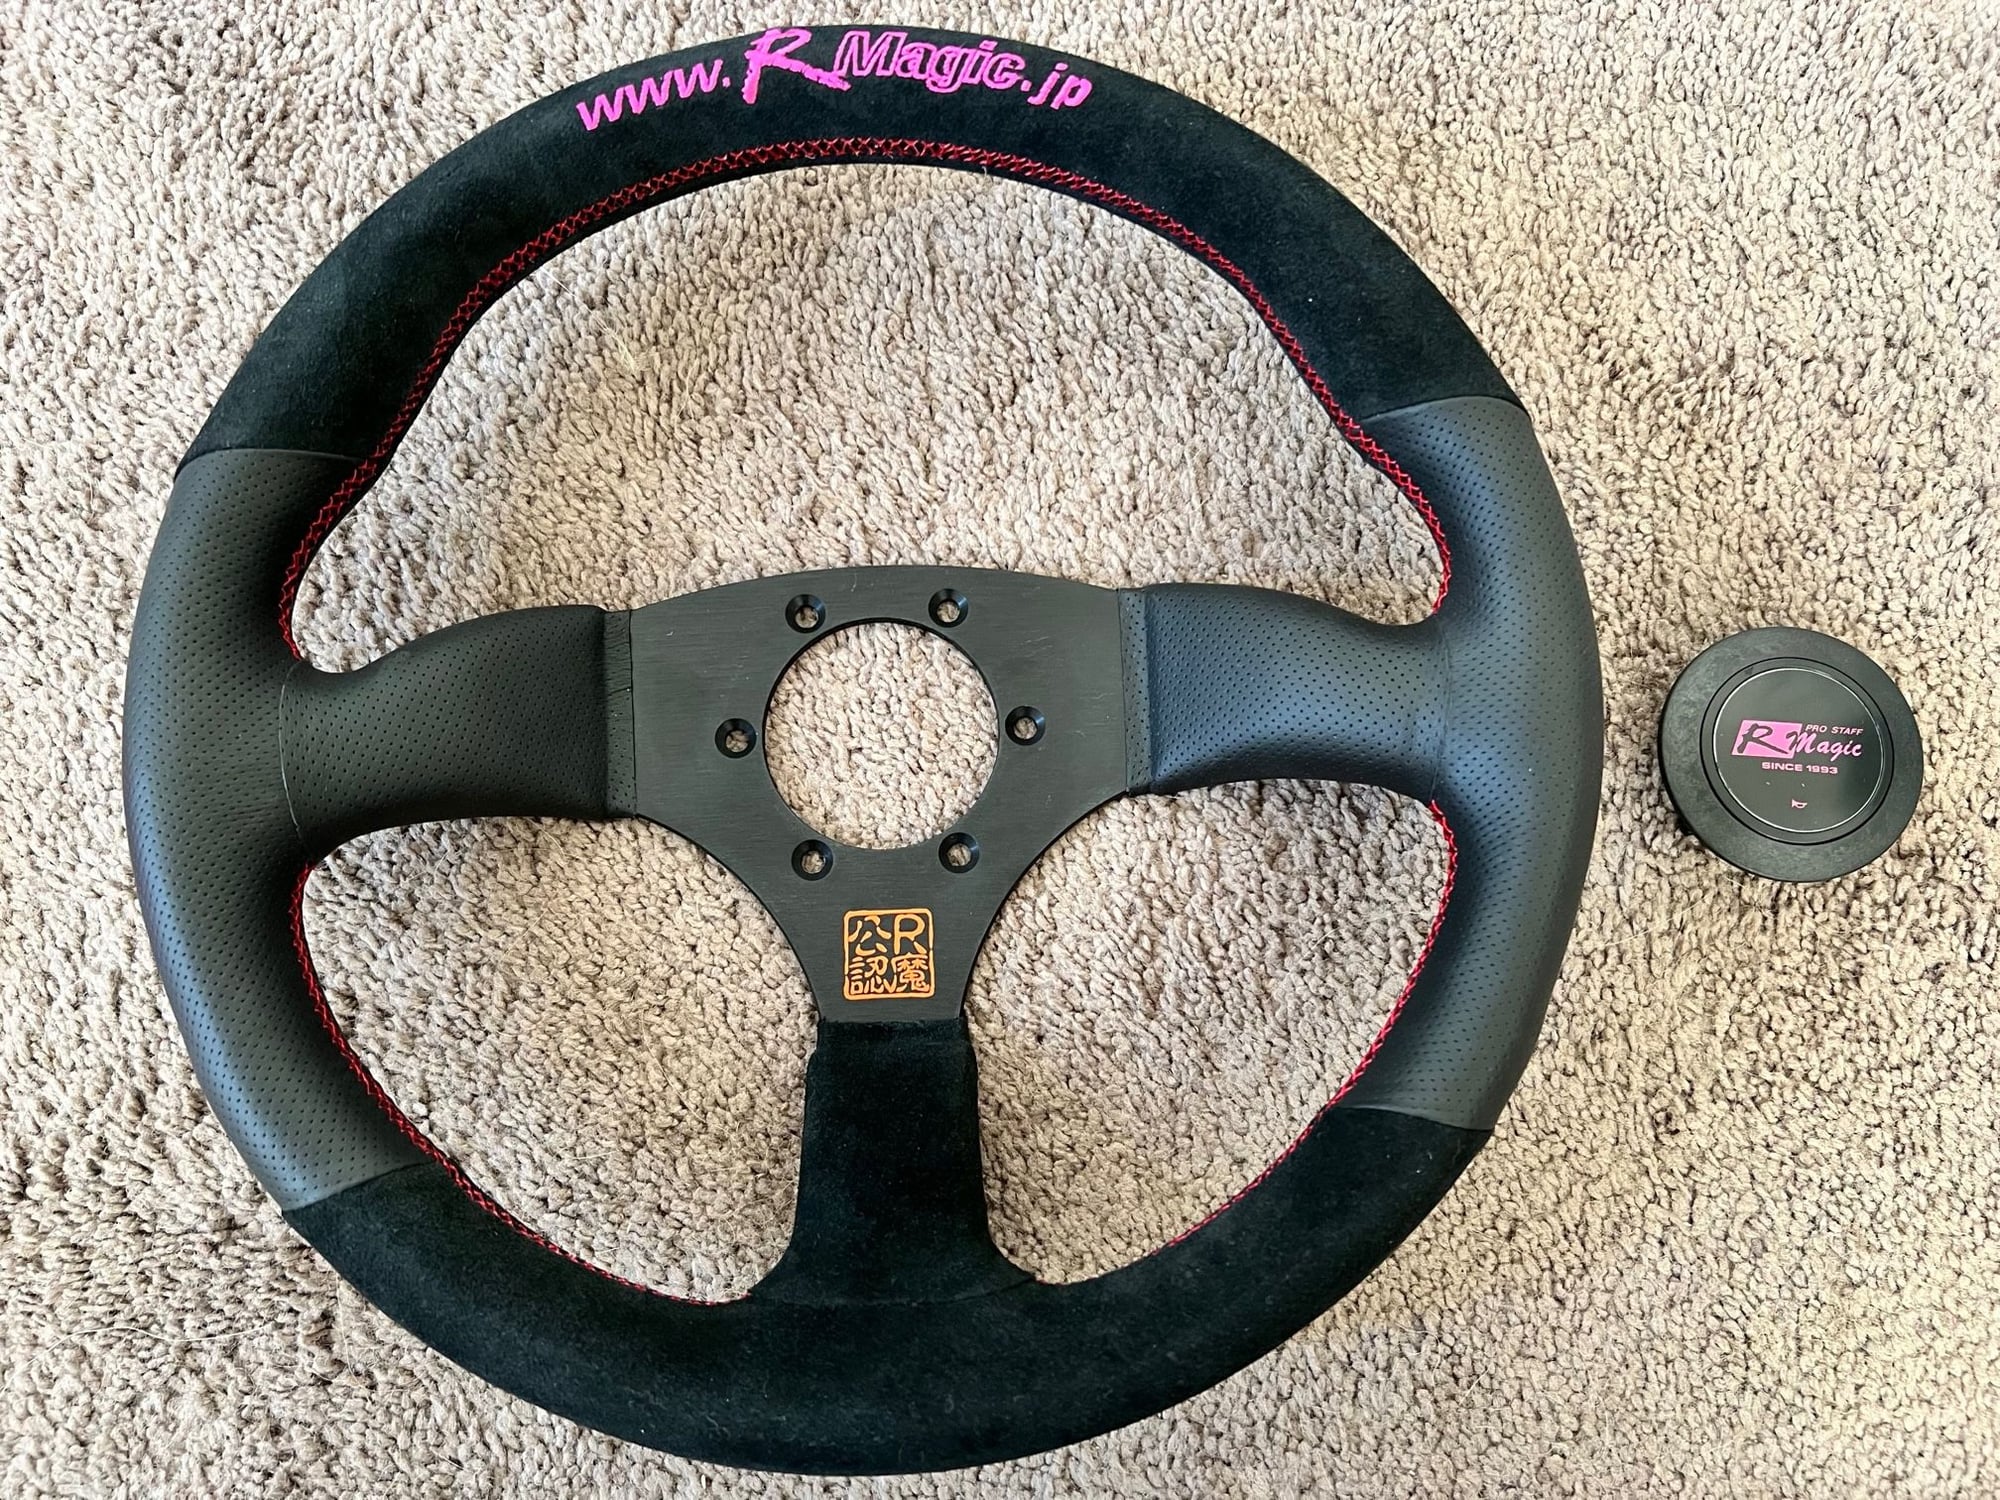 Interior/Upholstery - R-Magic 330mm Deep Racing Wheel + Extras - New - 0  All Models - Monterey, CA 93940, United States